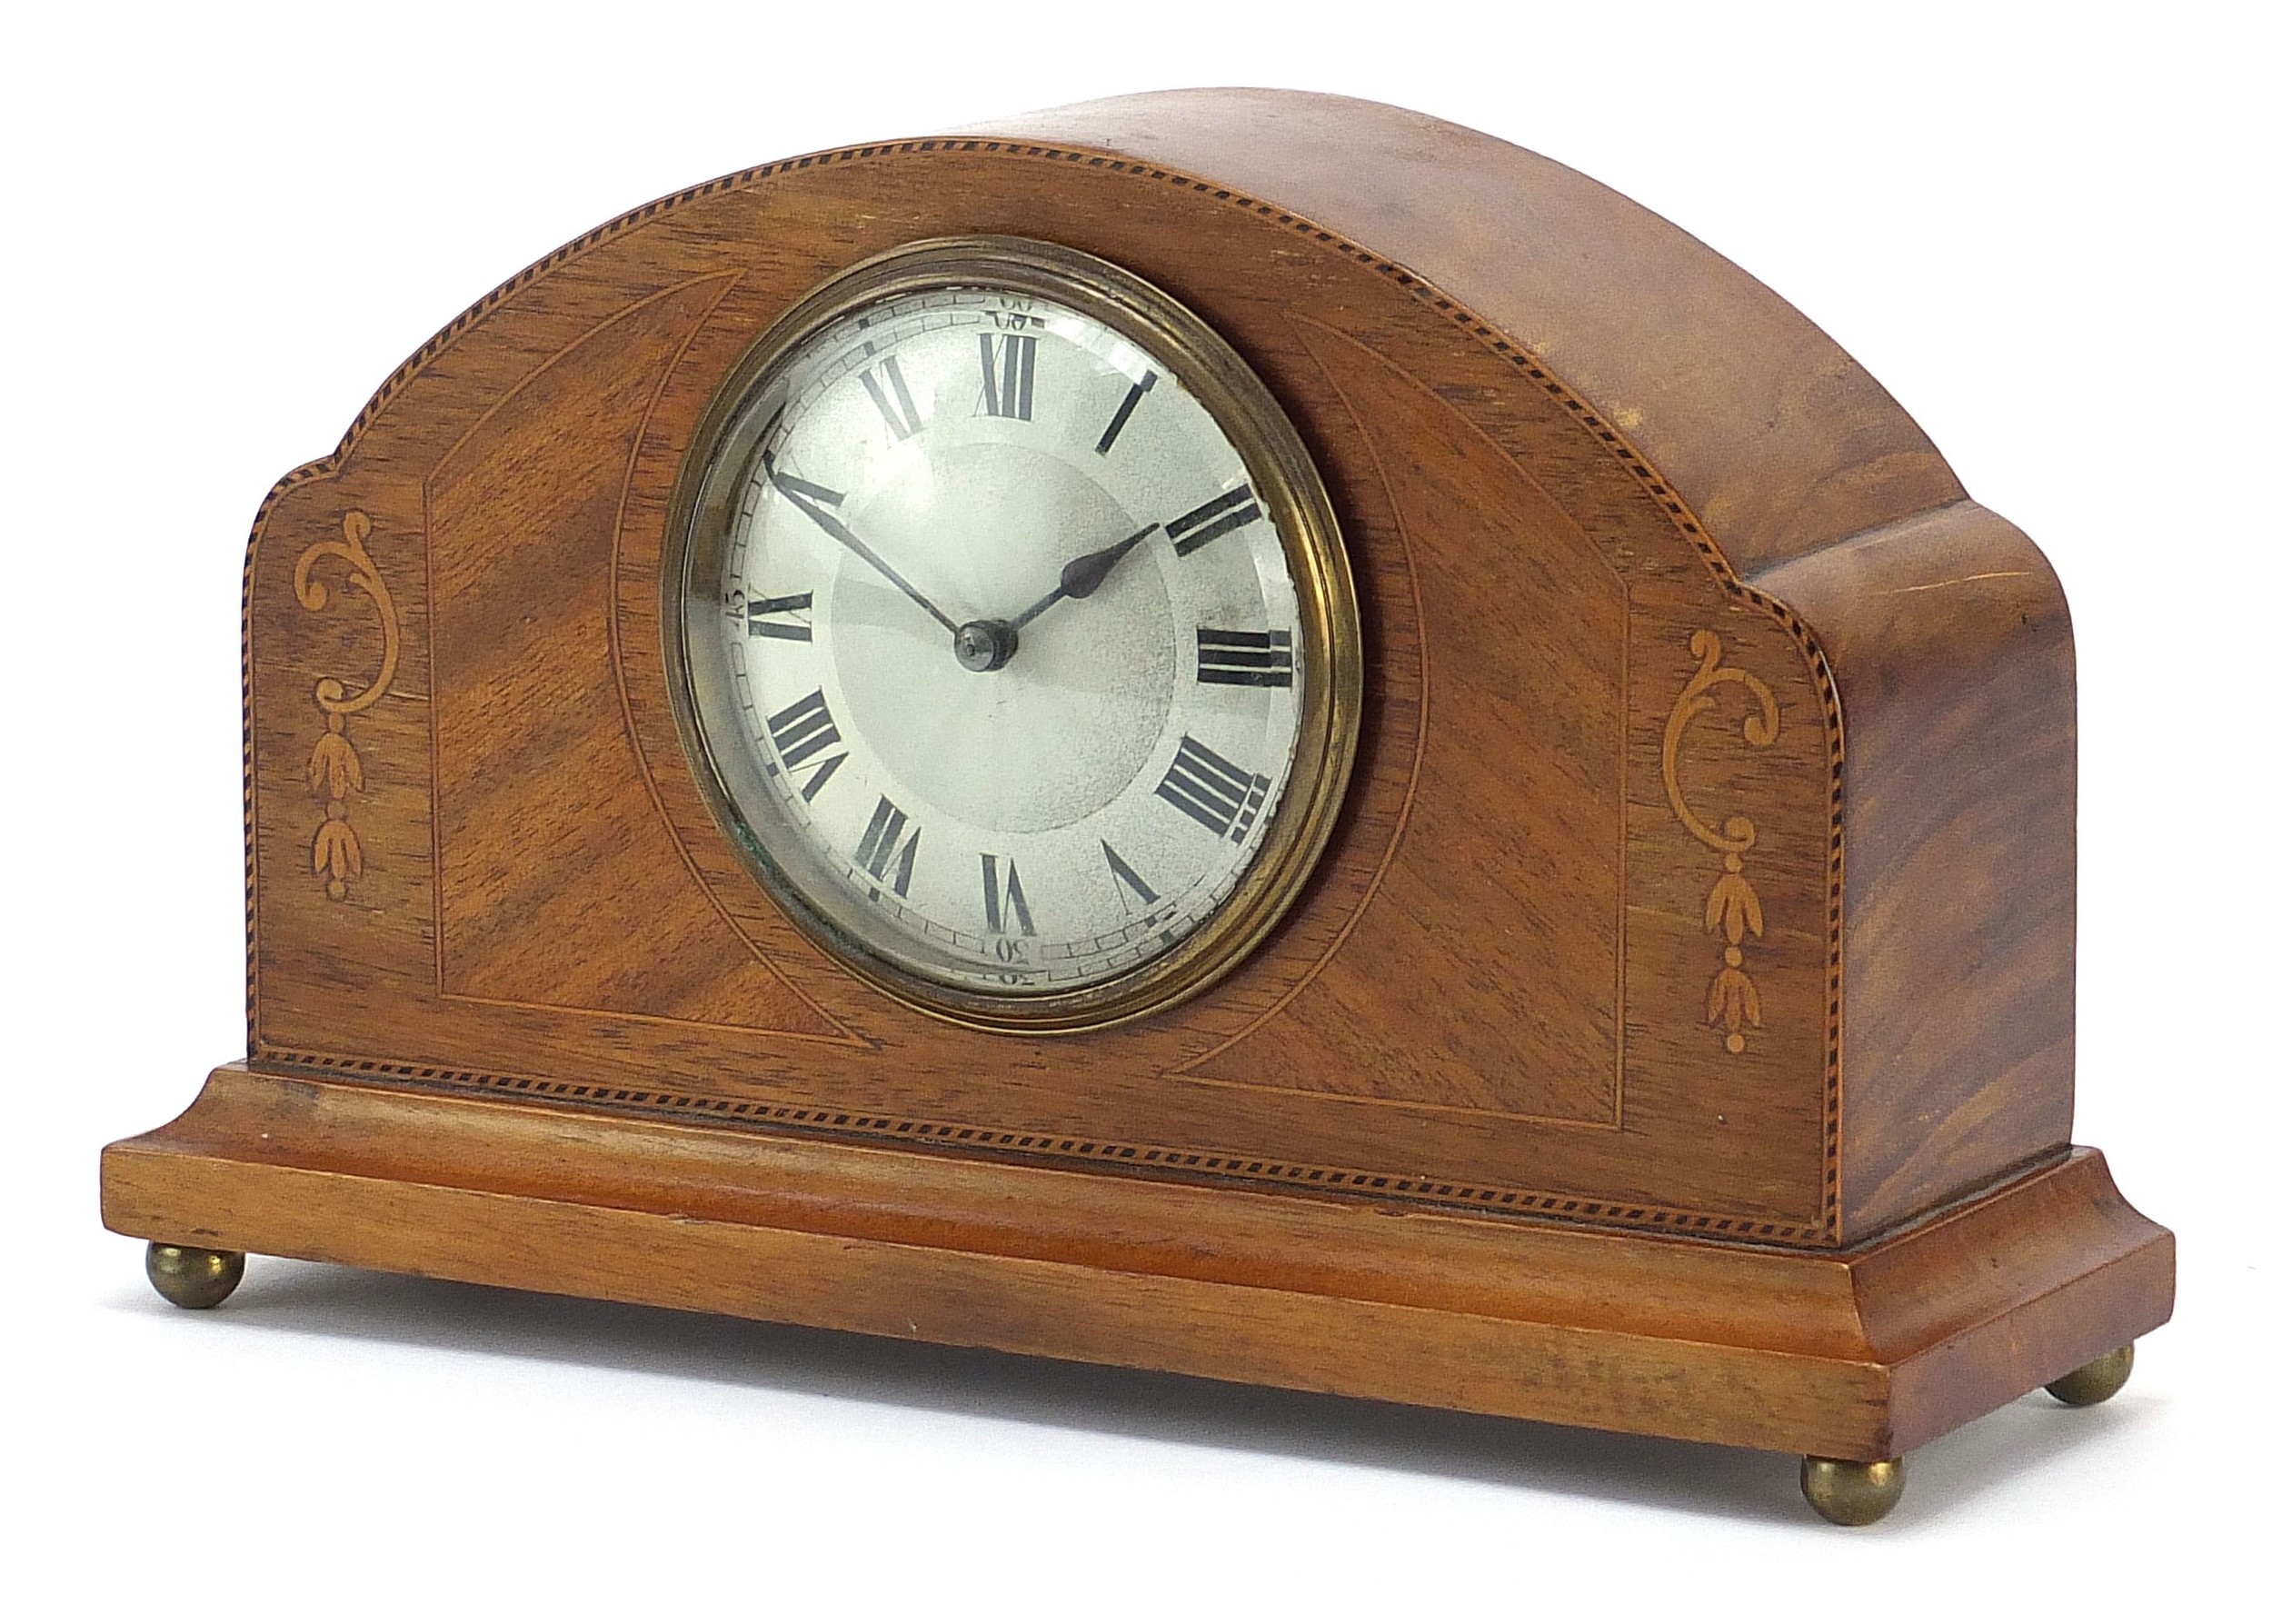 Edwardian inlaid mahogany inlaid mantle clock with Roman numerals, 25.5cm wide : For Further